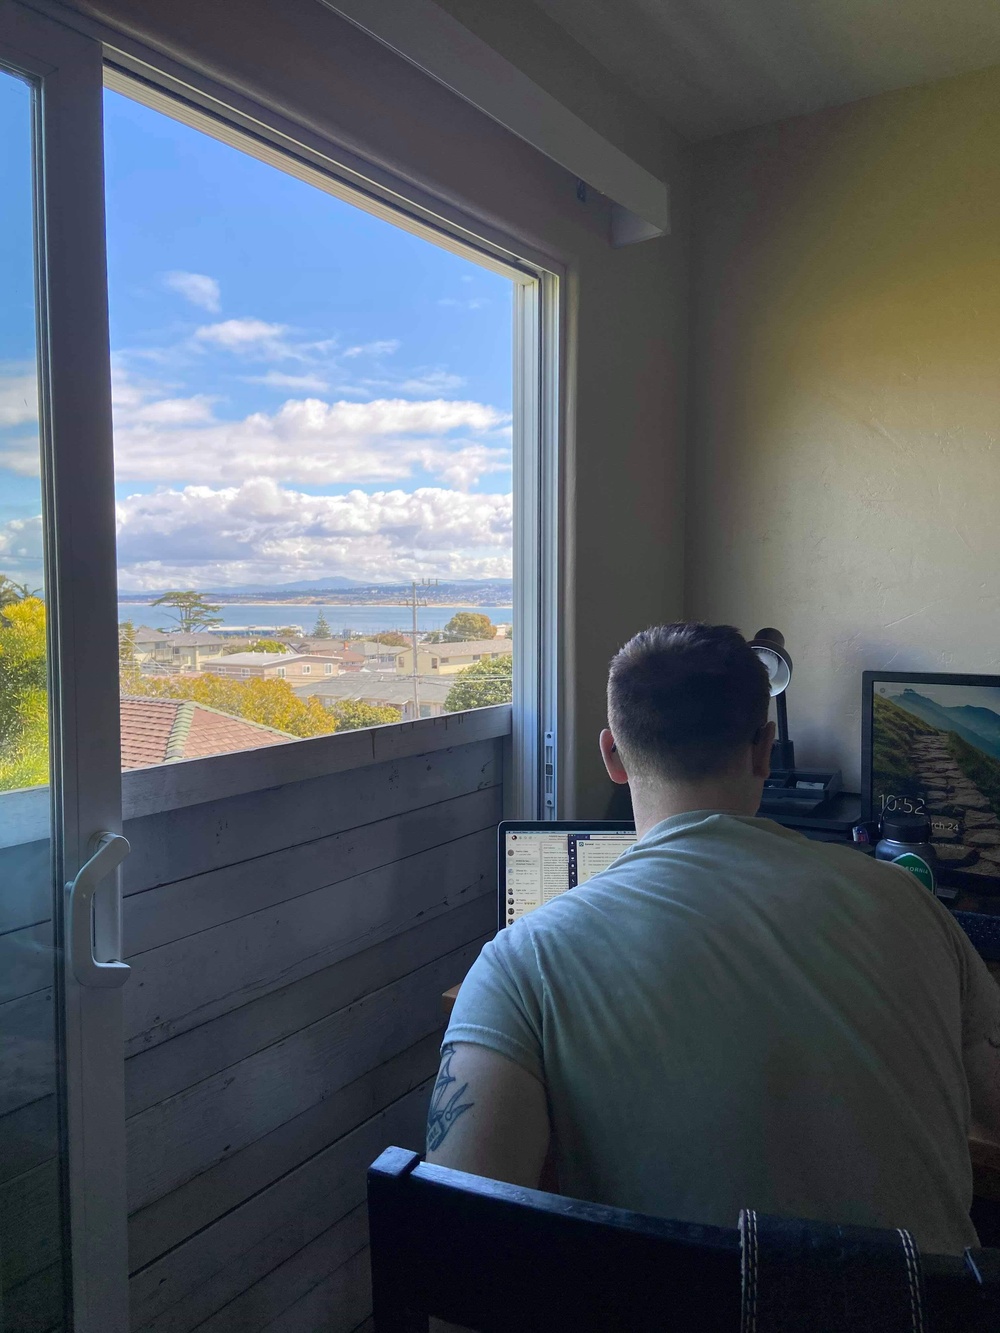 Online courses with a view